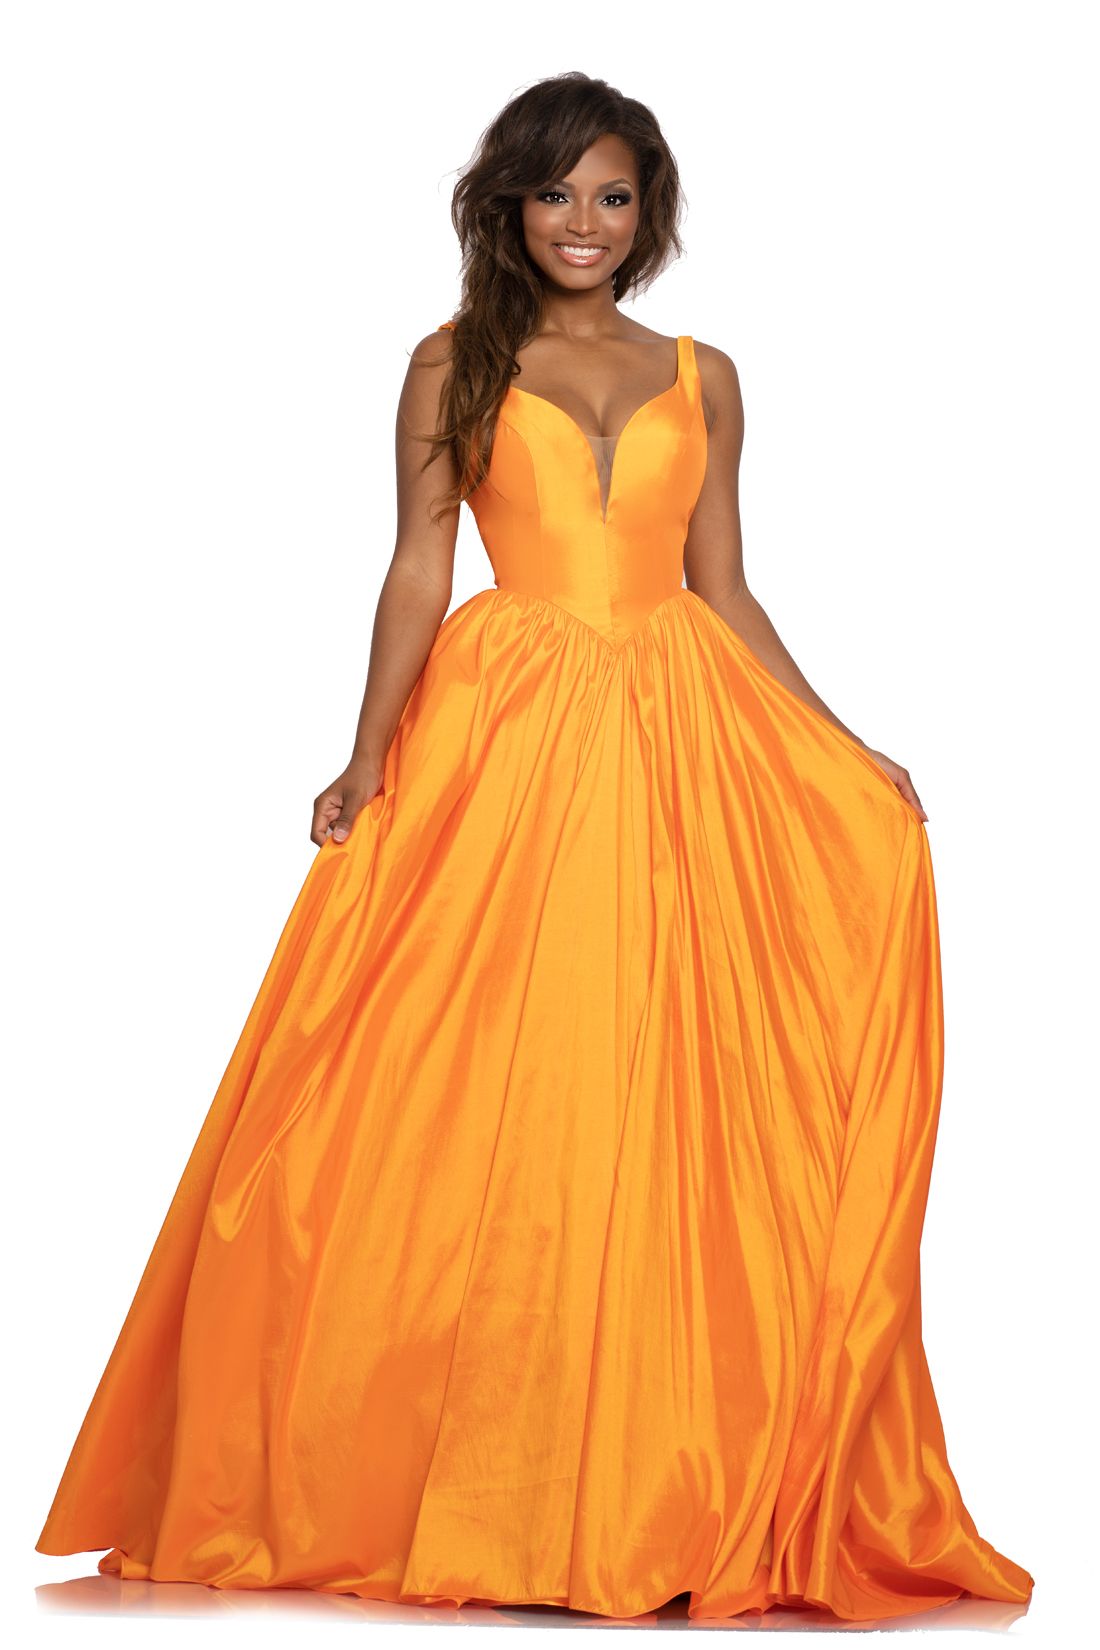 Johnathan Kayne 2225 Major Cinderella Vibes in this shimmery taffeta long A line prom dress.  This pageant gown features a plunging sweetheart neckline with mesh panel and v back.   Colors:  Bubblegum, Mandarin  Sizes  00, 0, 2, 4, 6, 8, 10, 12, 14, 16